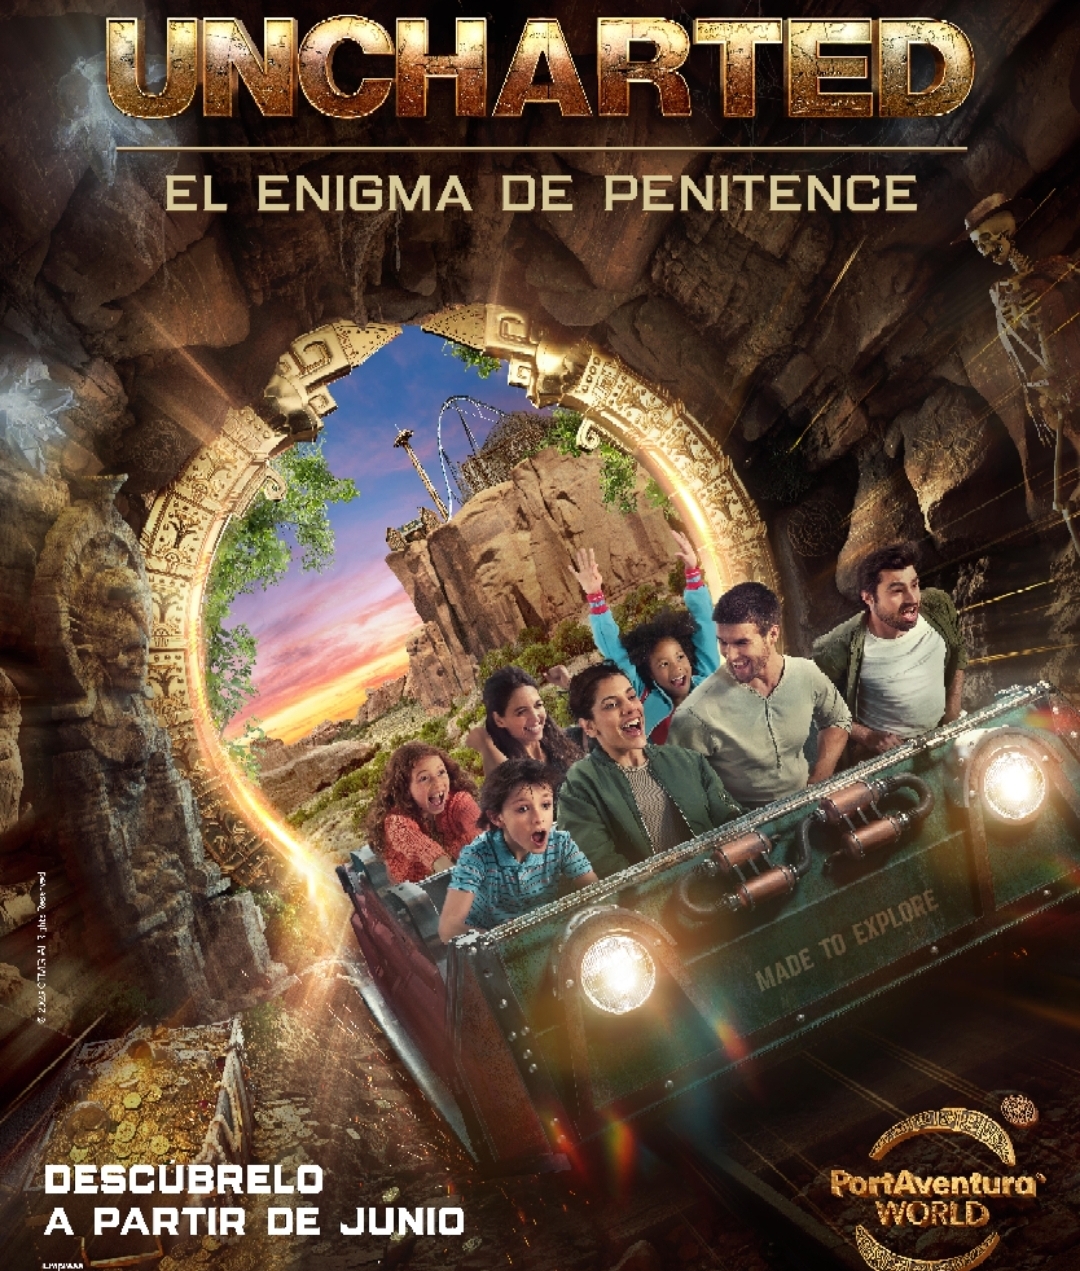 Experiential Licensing PortAventura World and Sony Pictures Launch Attraction Based On Uncharted Franchise